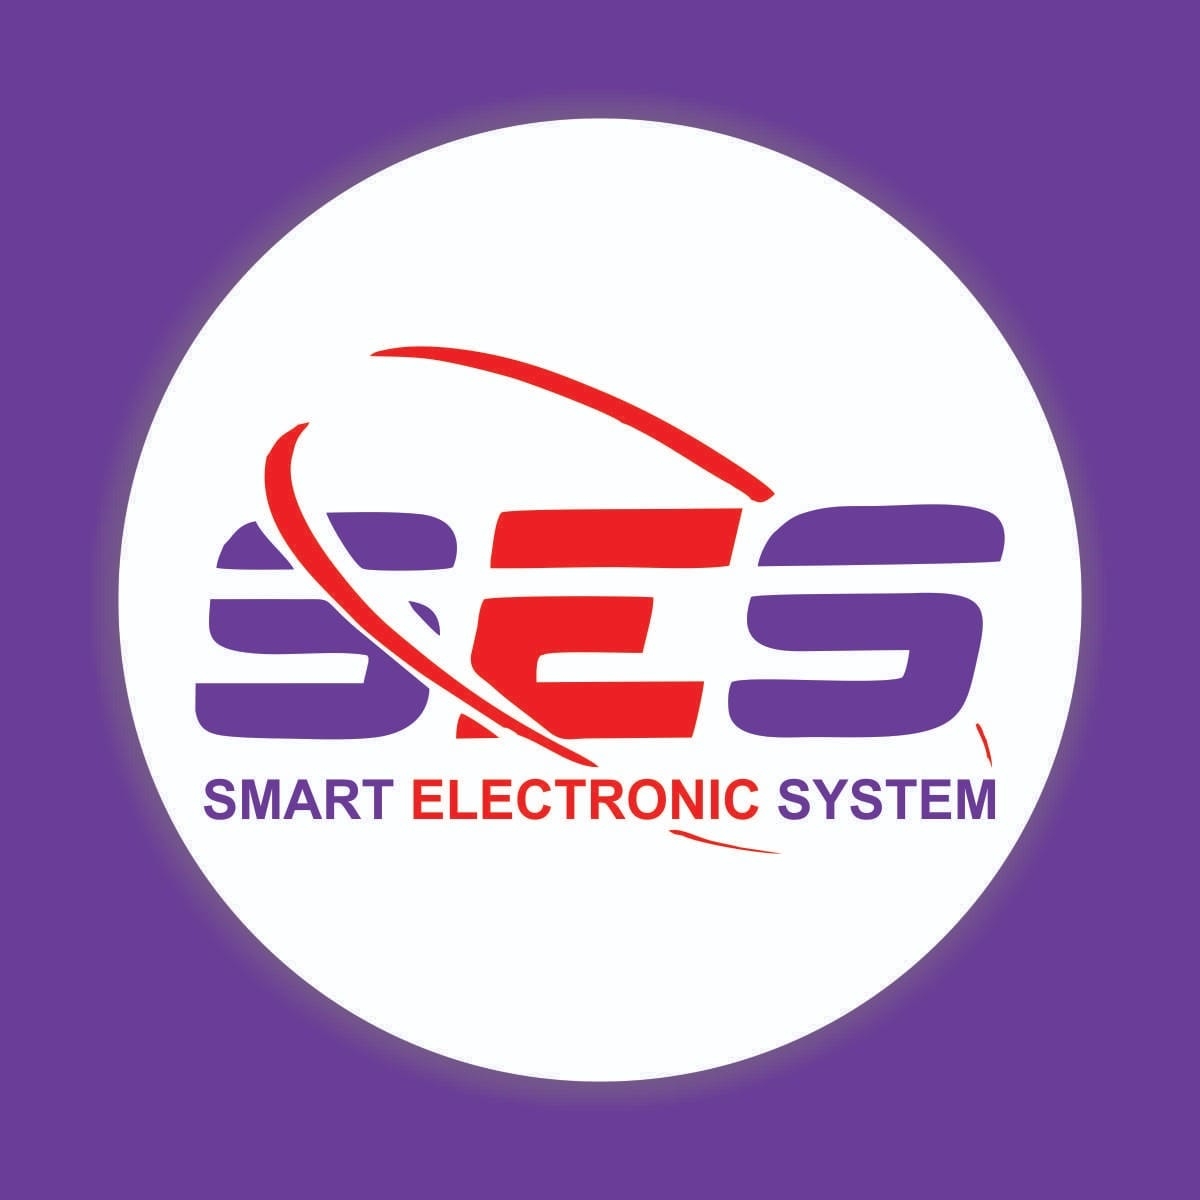 Smart Electronic System